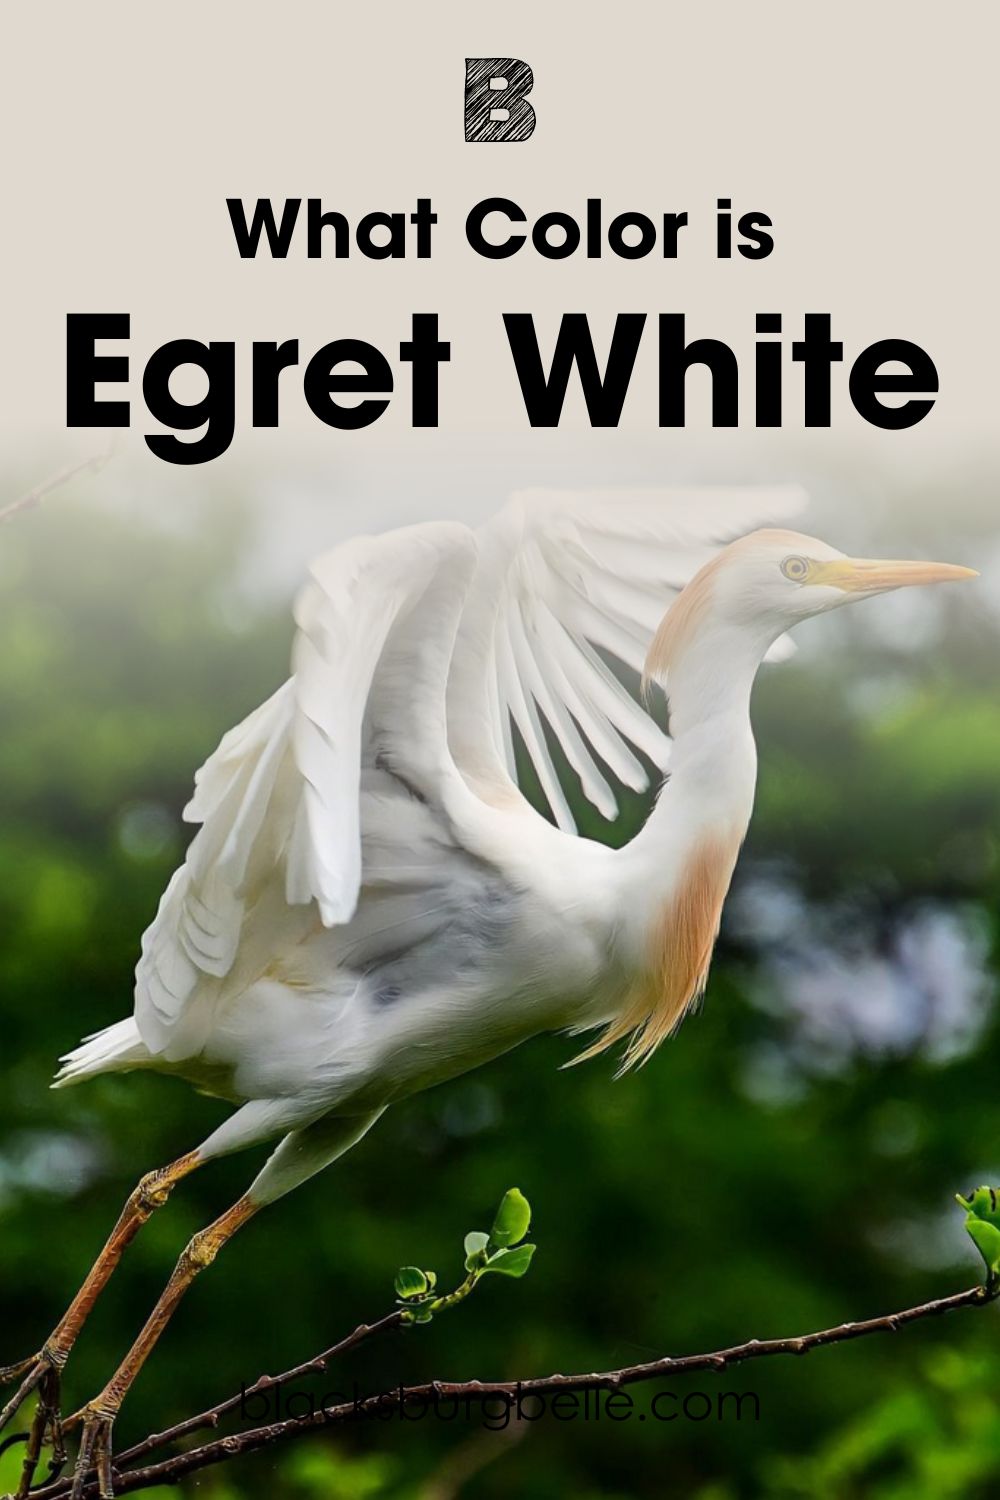 What Color is Egret White